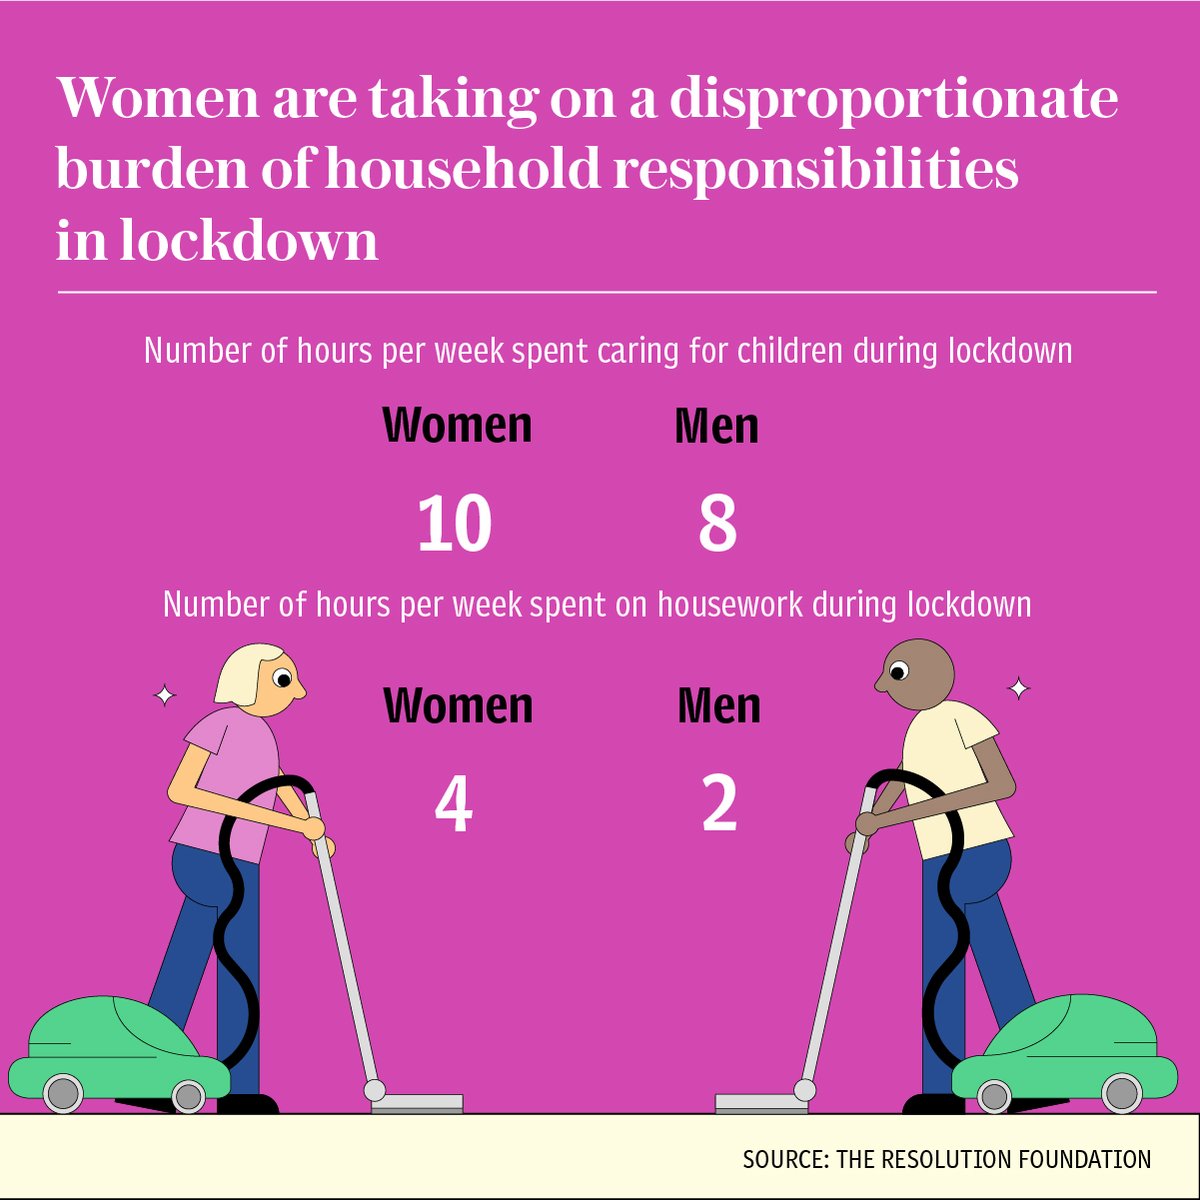 And it's not just about housework – this is how men and women compare when it comes to childcare in lockdown